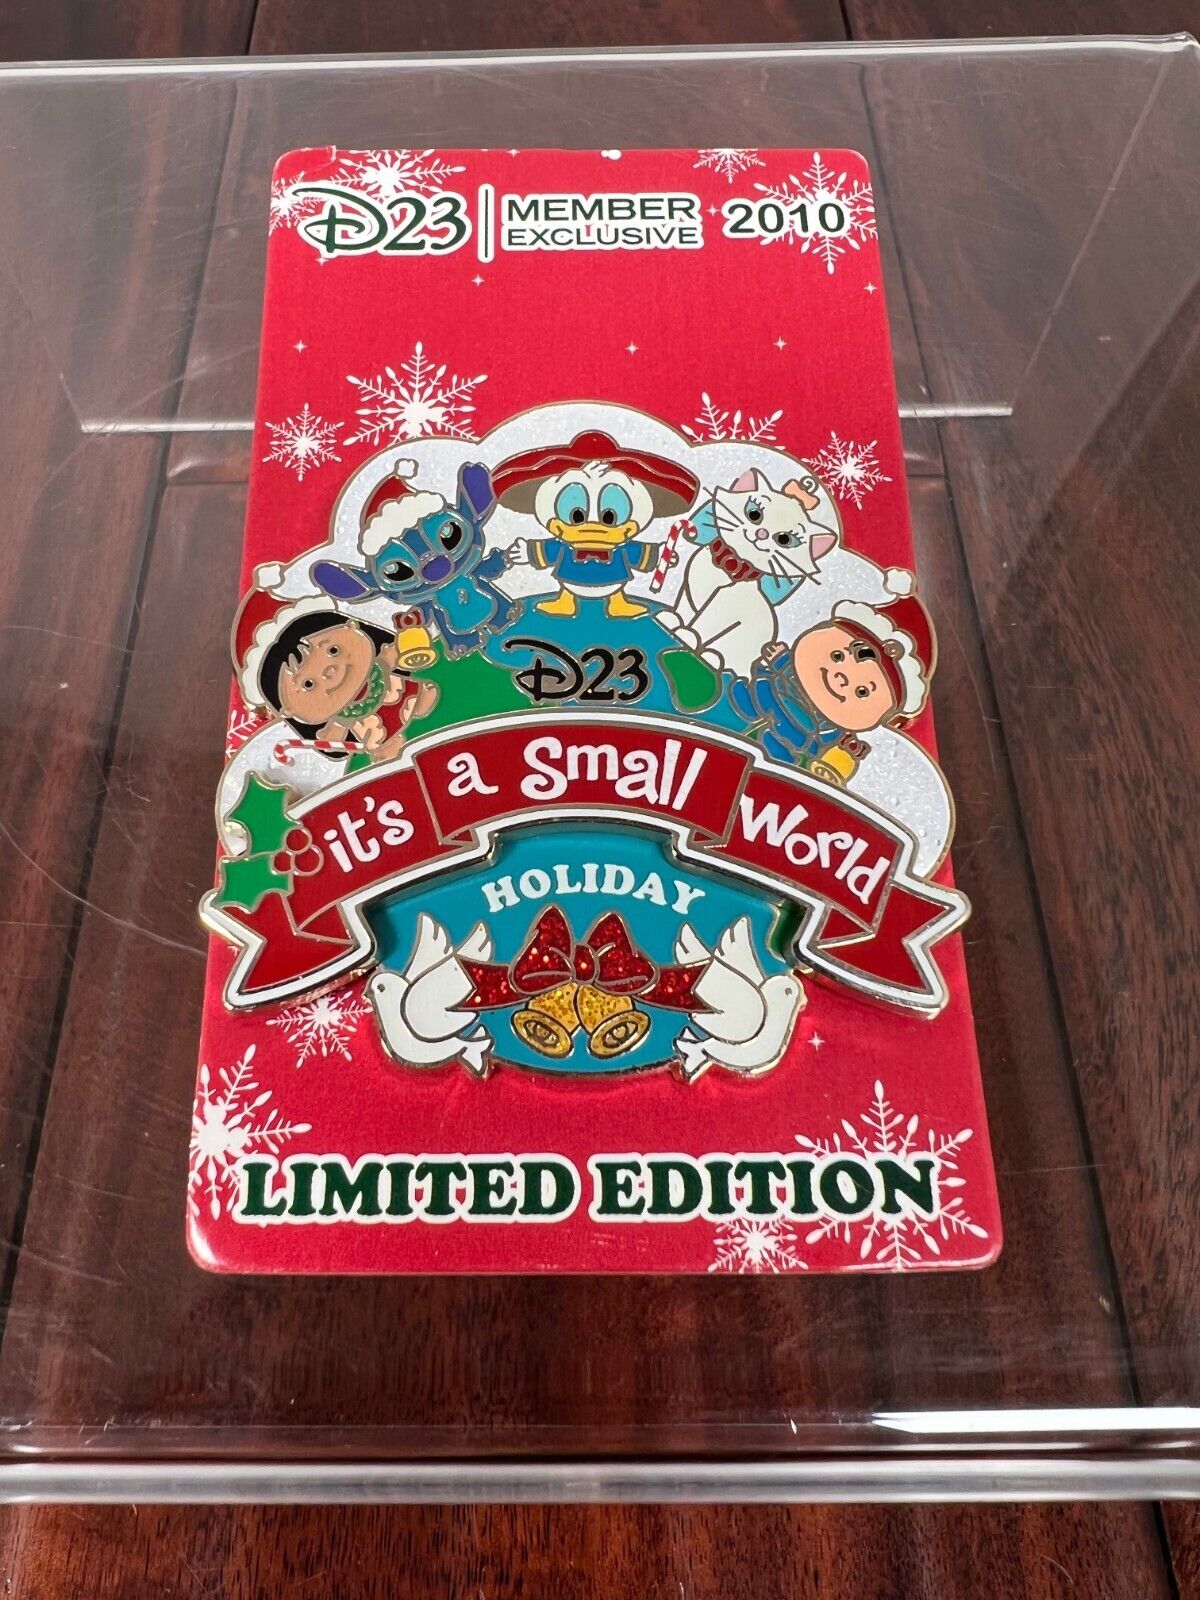 Pin 81026 DLR - It's A Small World Holiday - D23 Exclusive